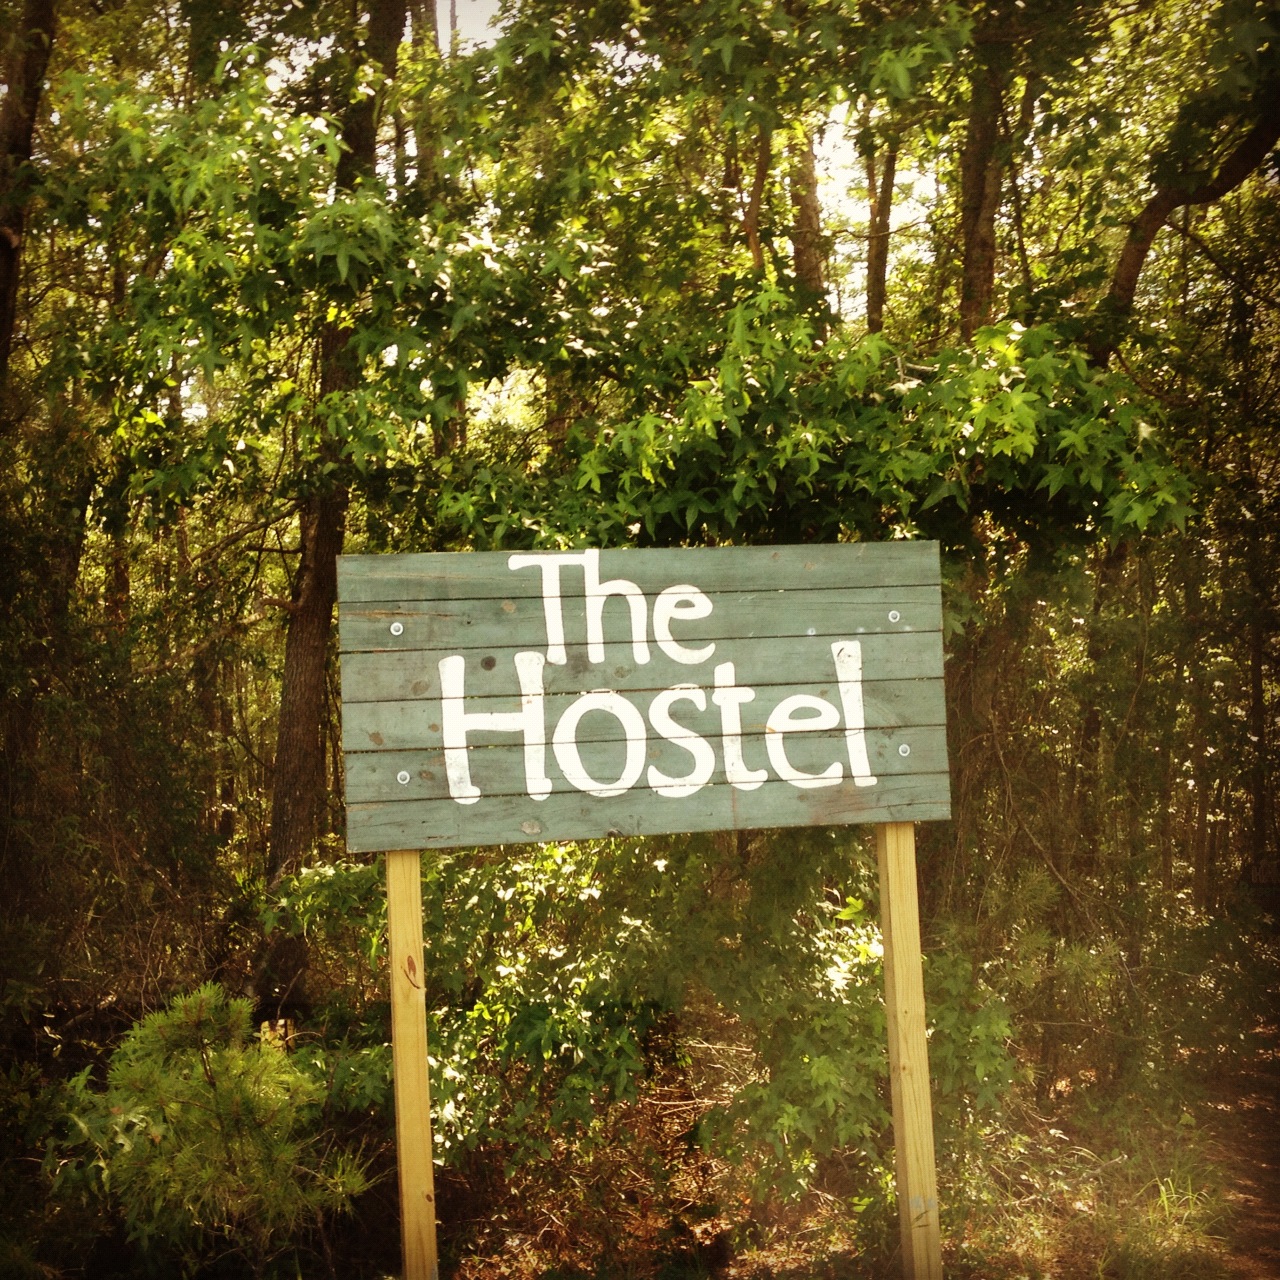 The Hostel In The Forest Experience at The Yogi Movement by Monica Dawn Stone